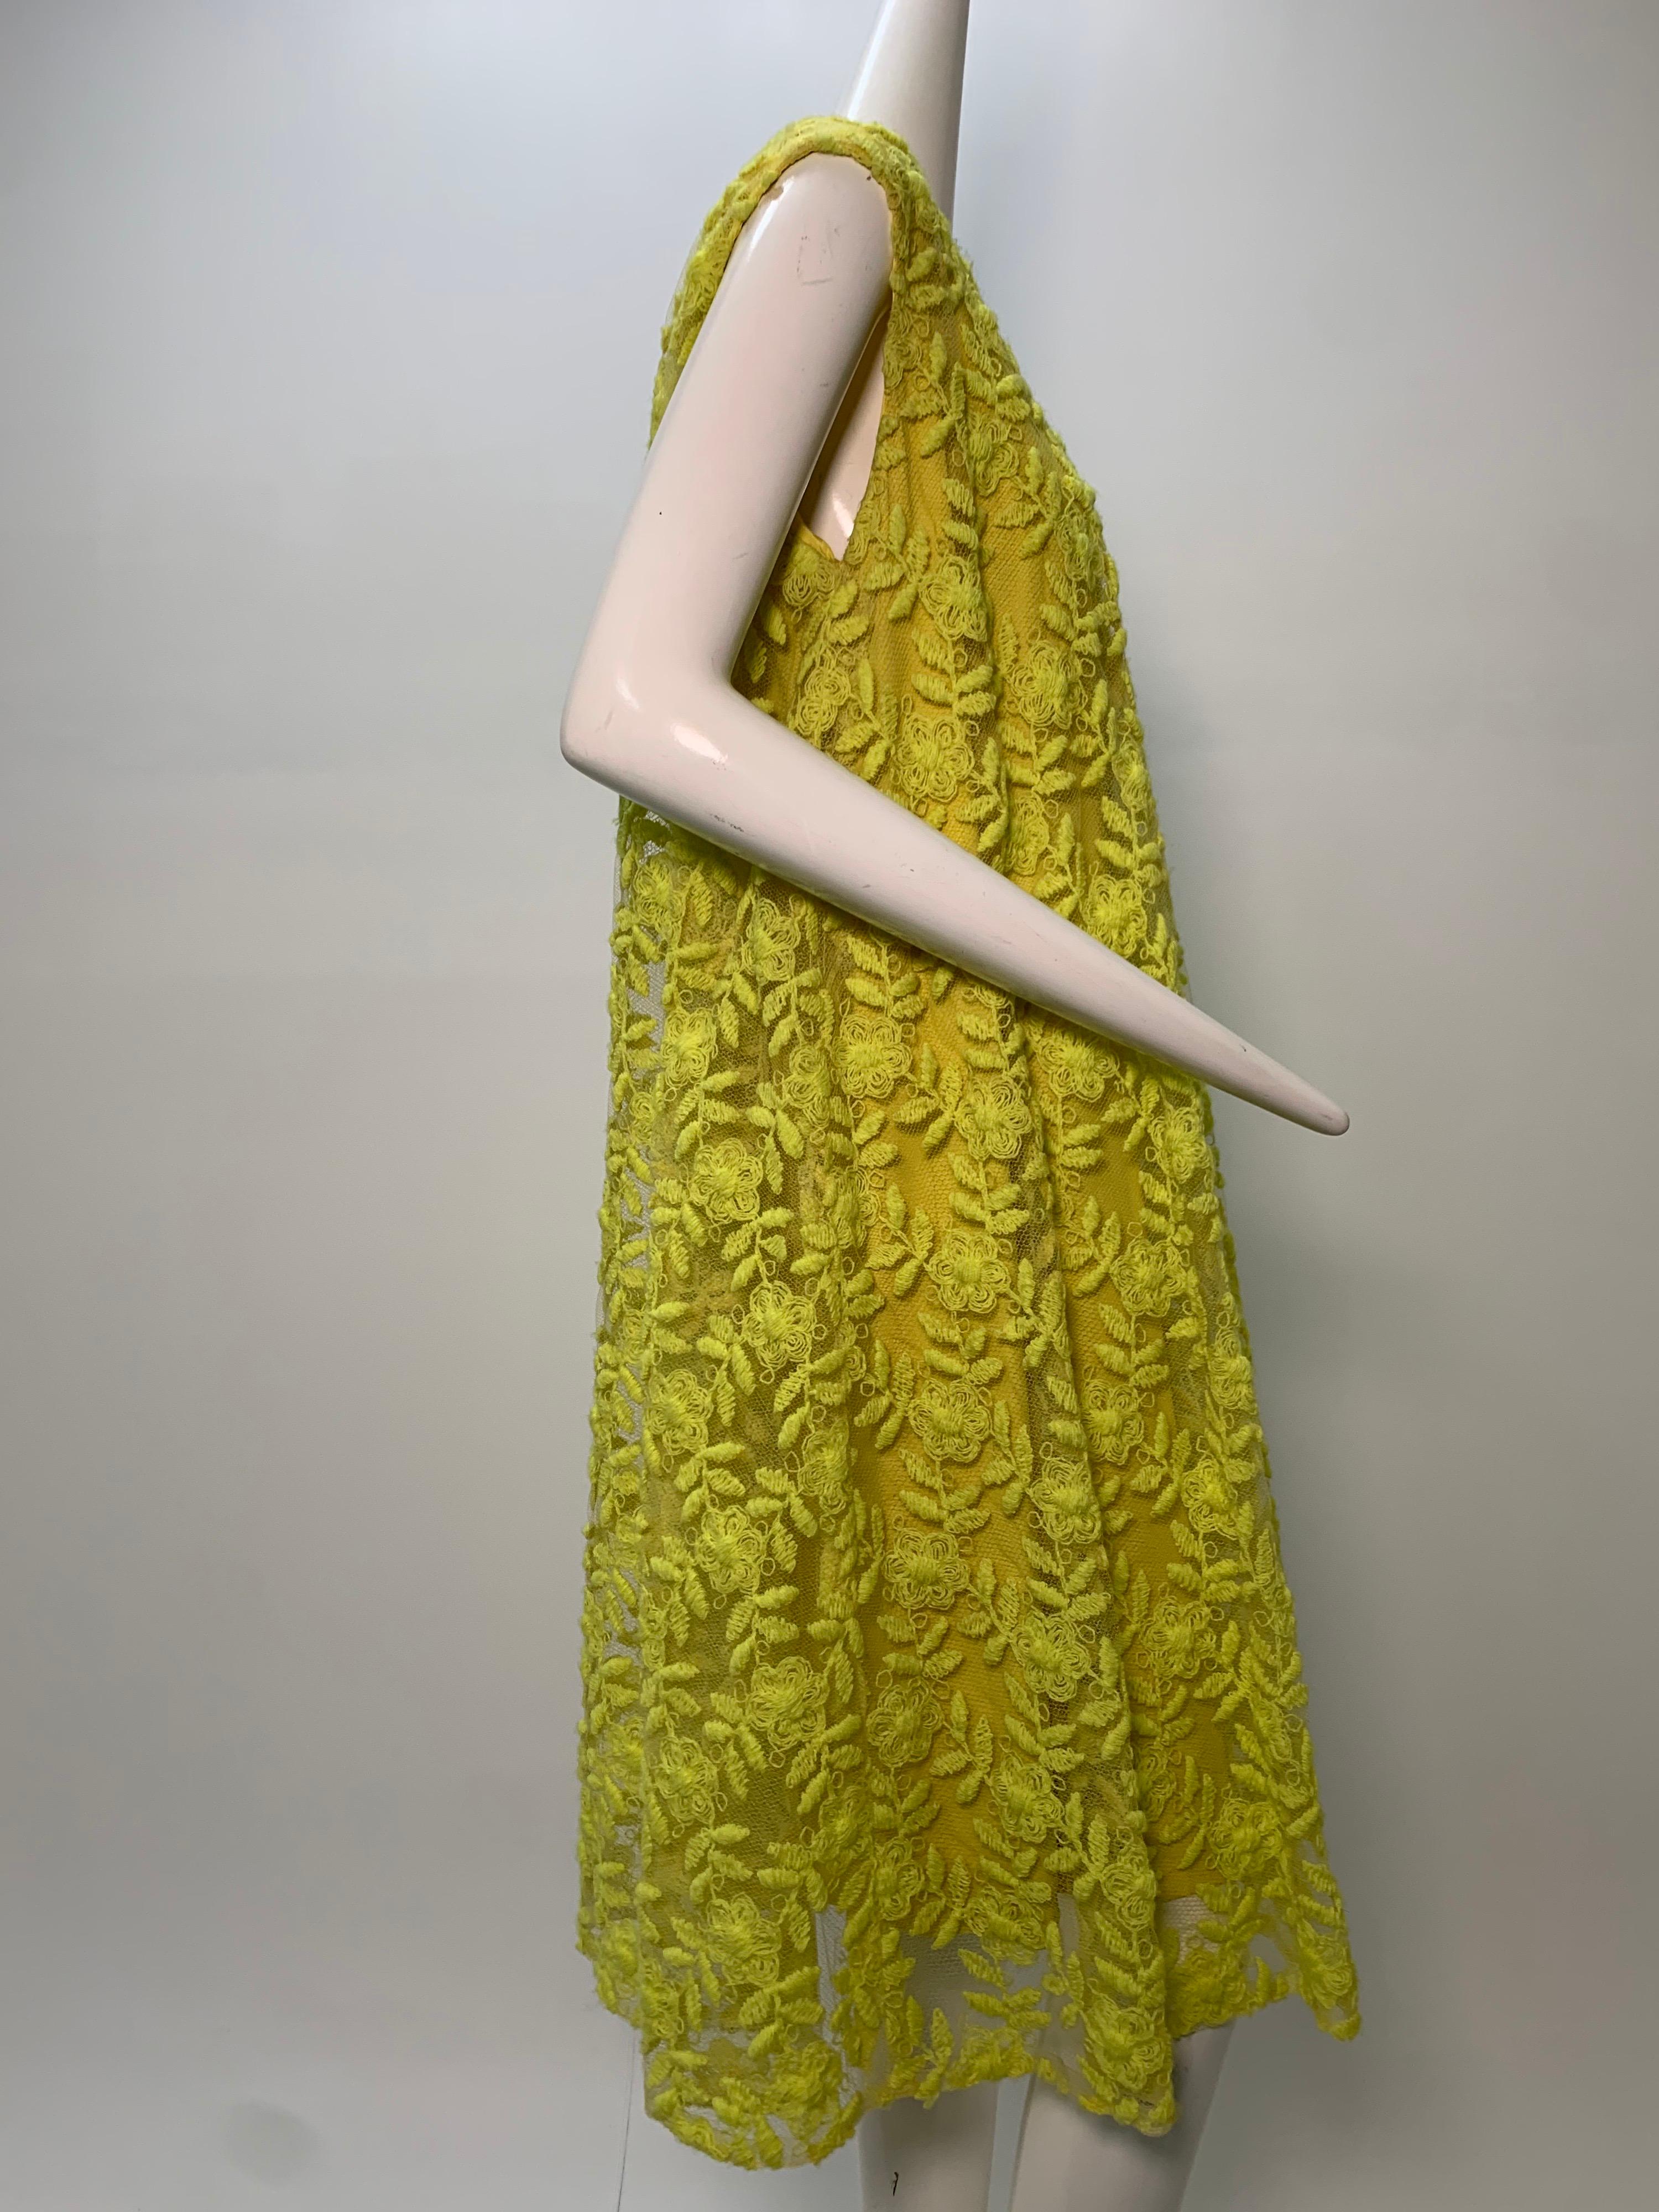 1960s Mr. Blackwell Neon Yellow Wide A-Line Swing Dress in Embroidered Tulle For Sale 1